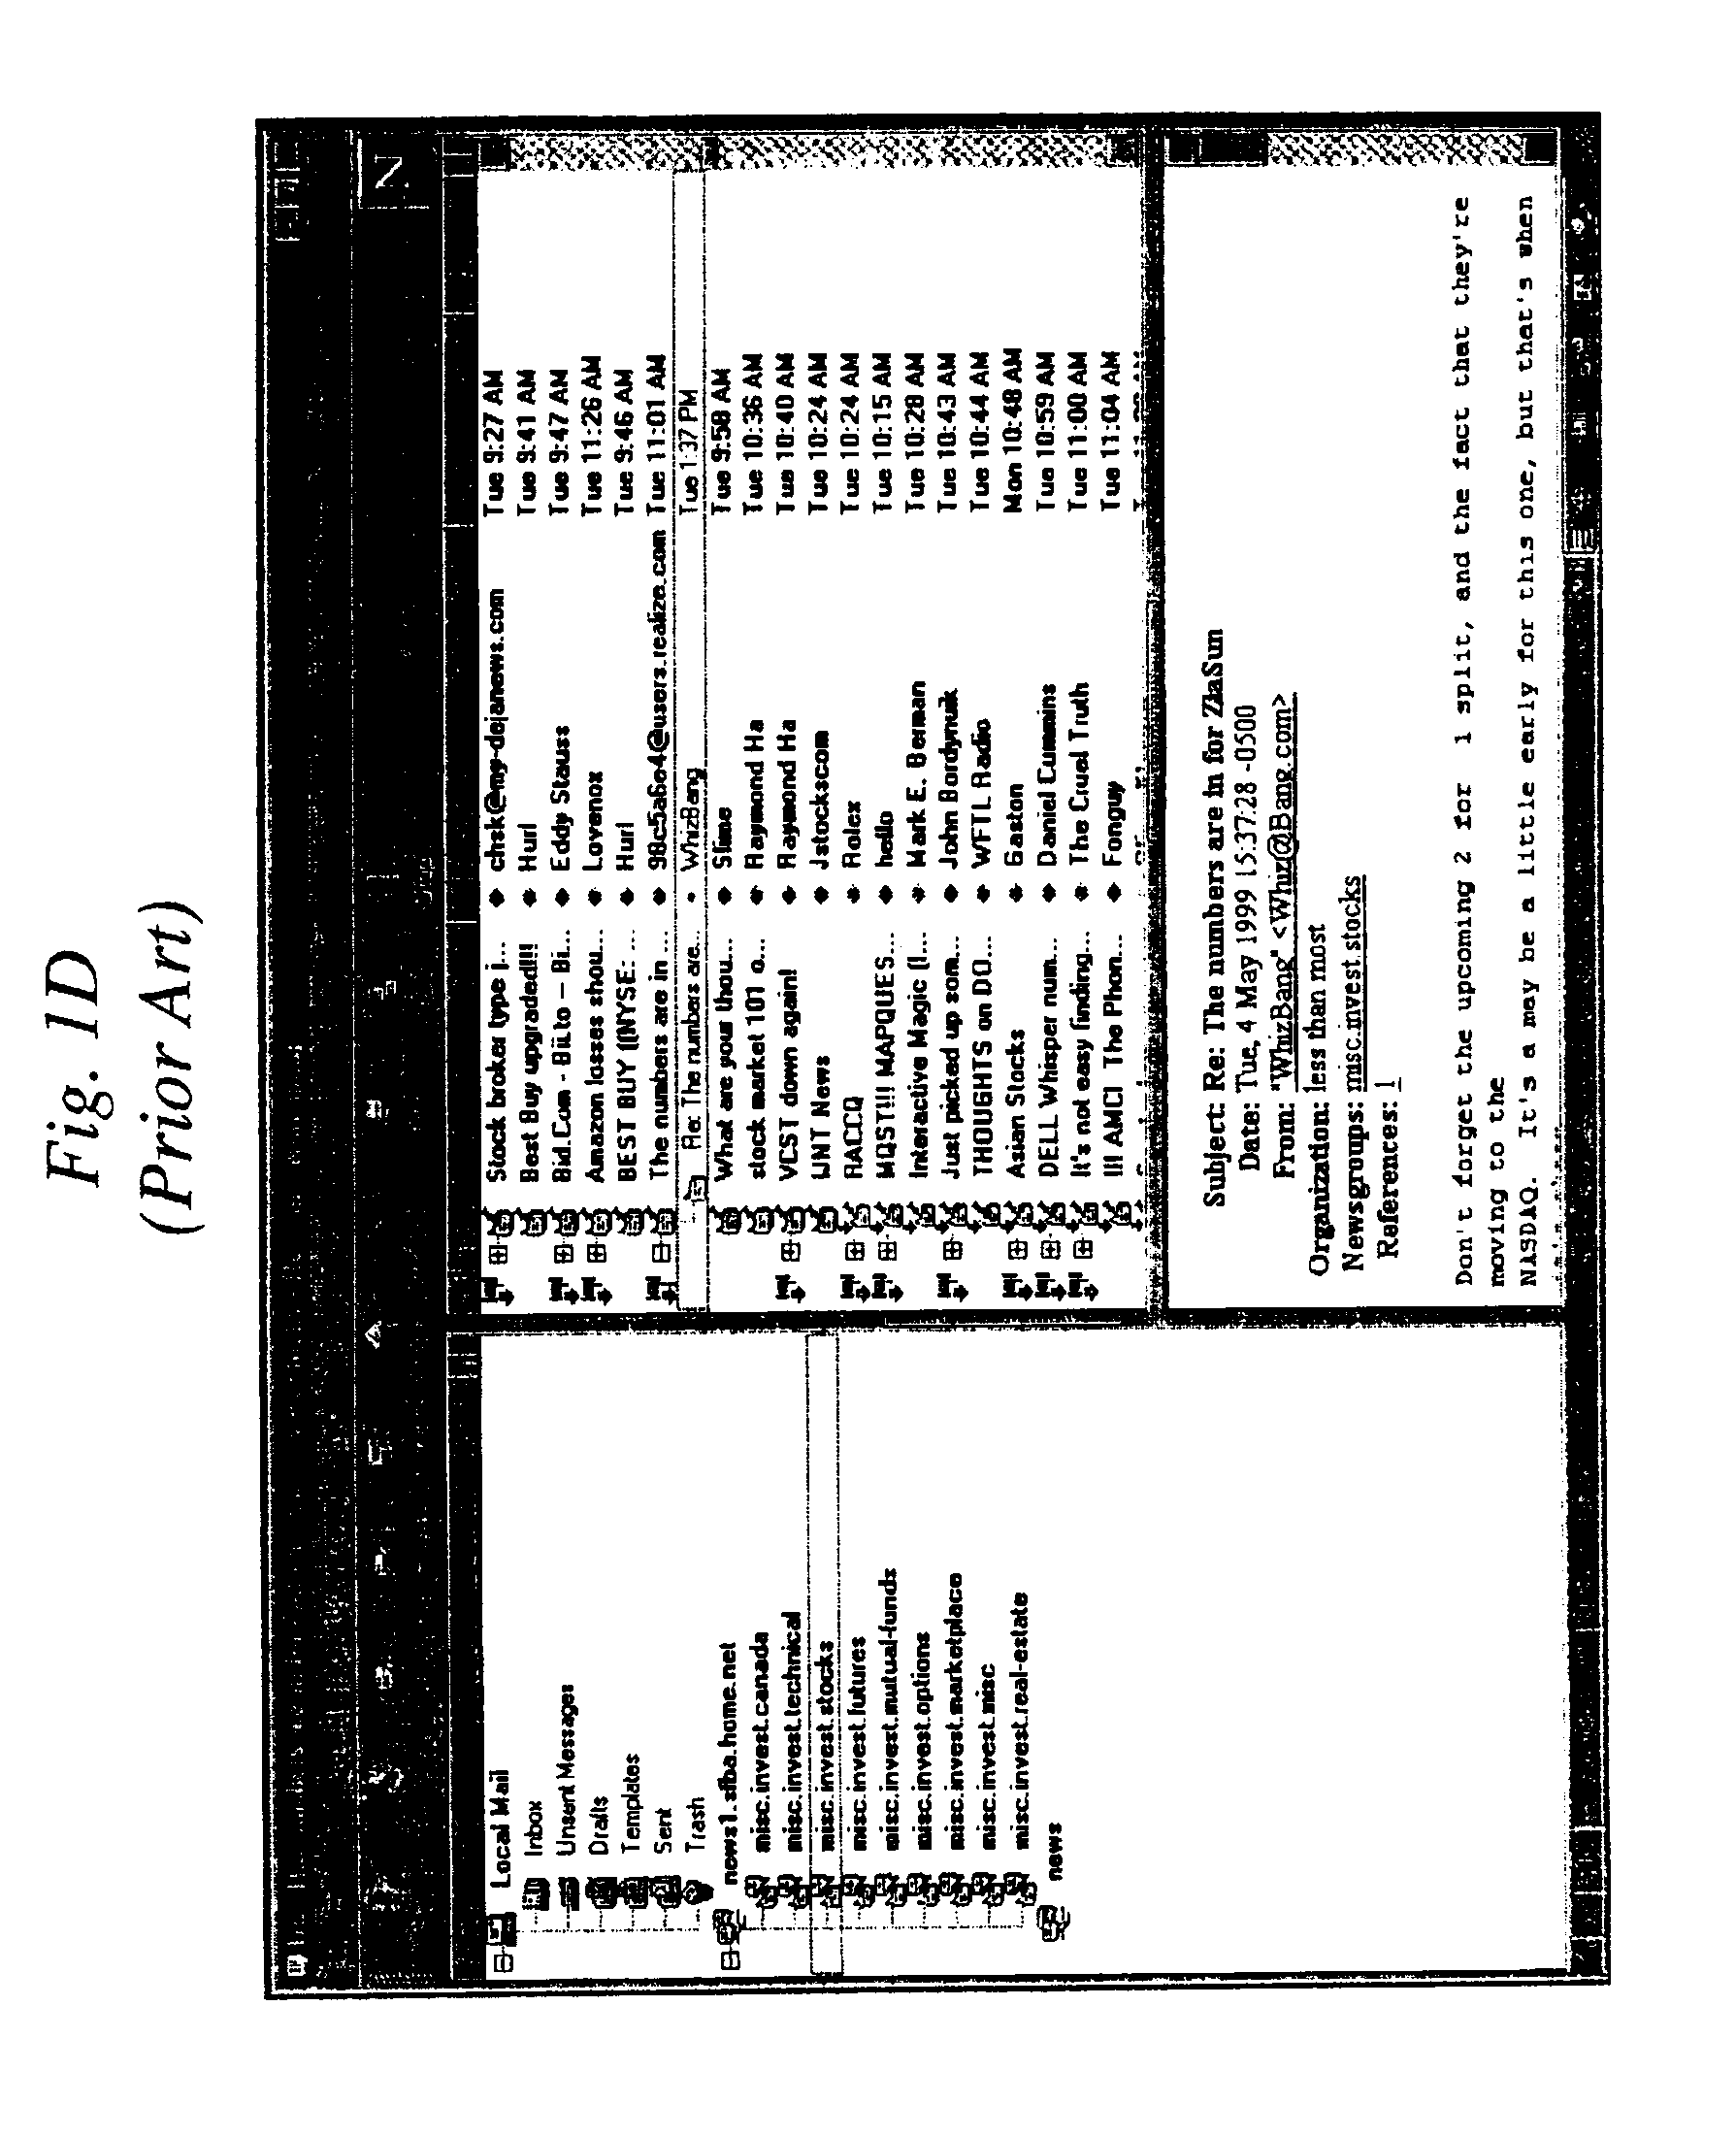 Online content tabulating system and method